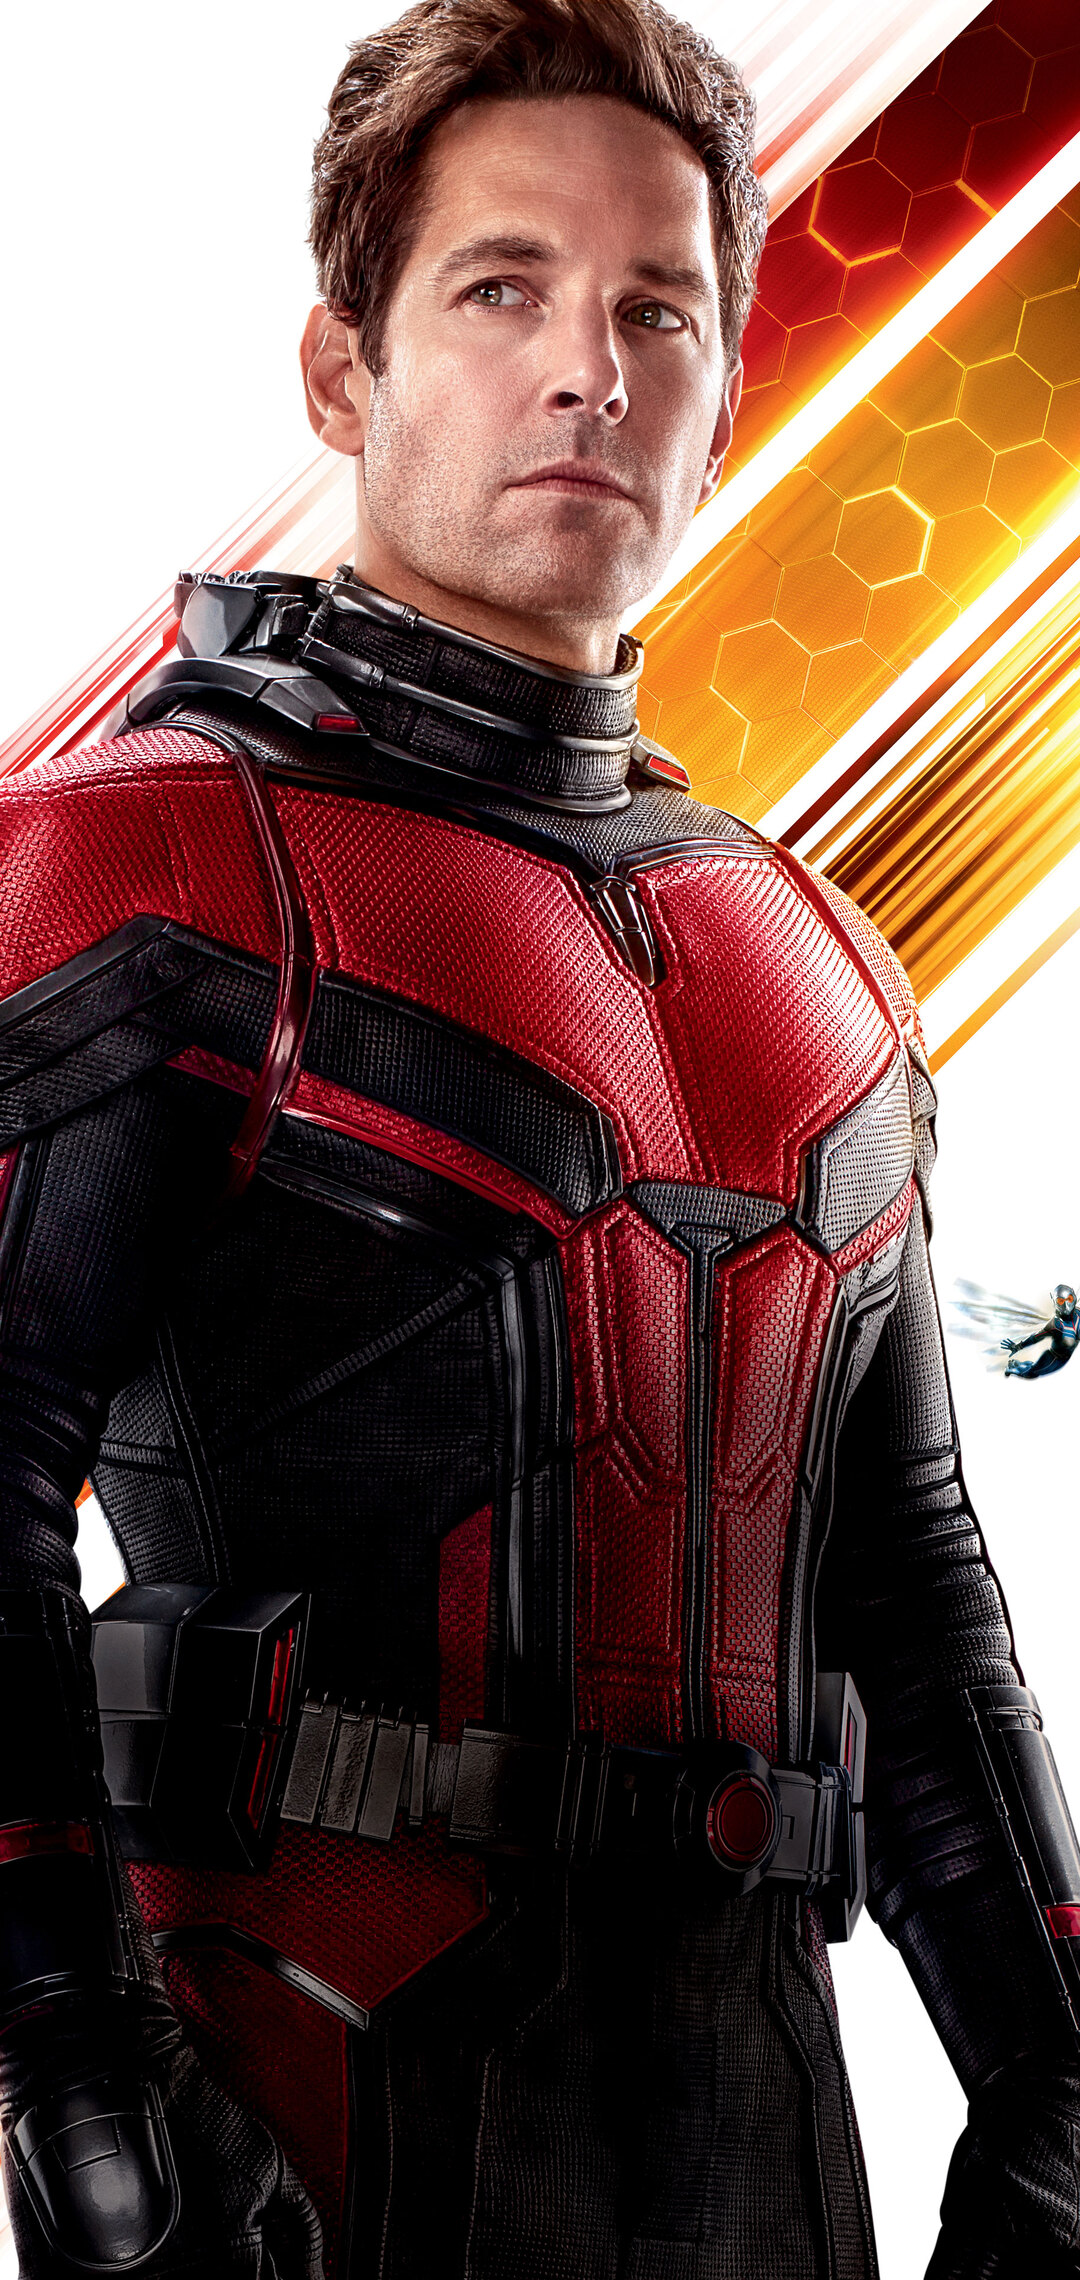 paul-rudd-as-antman-in-ant-man-and-the-wasp-10k-zp.jpg